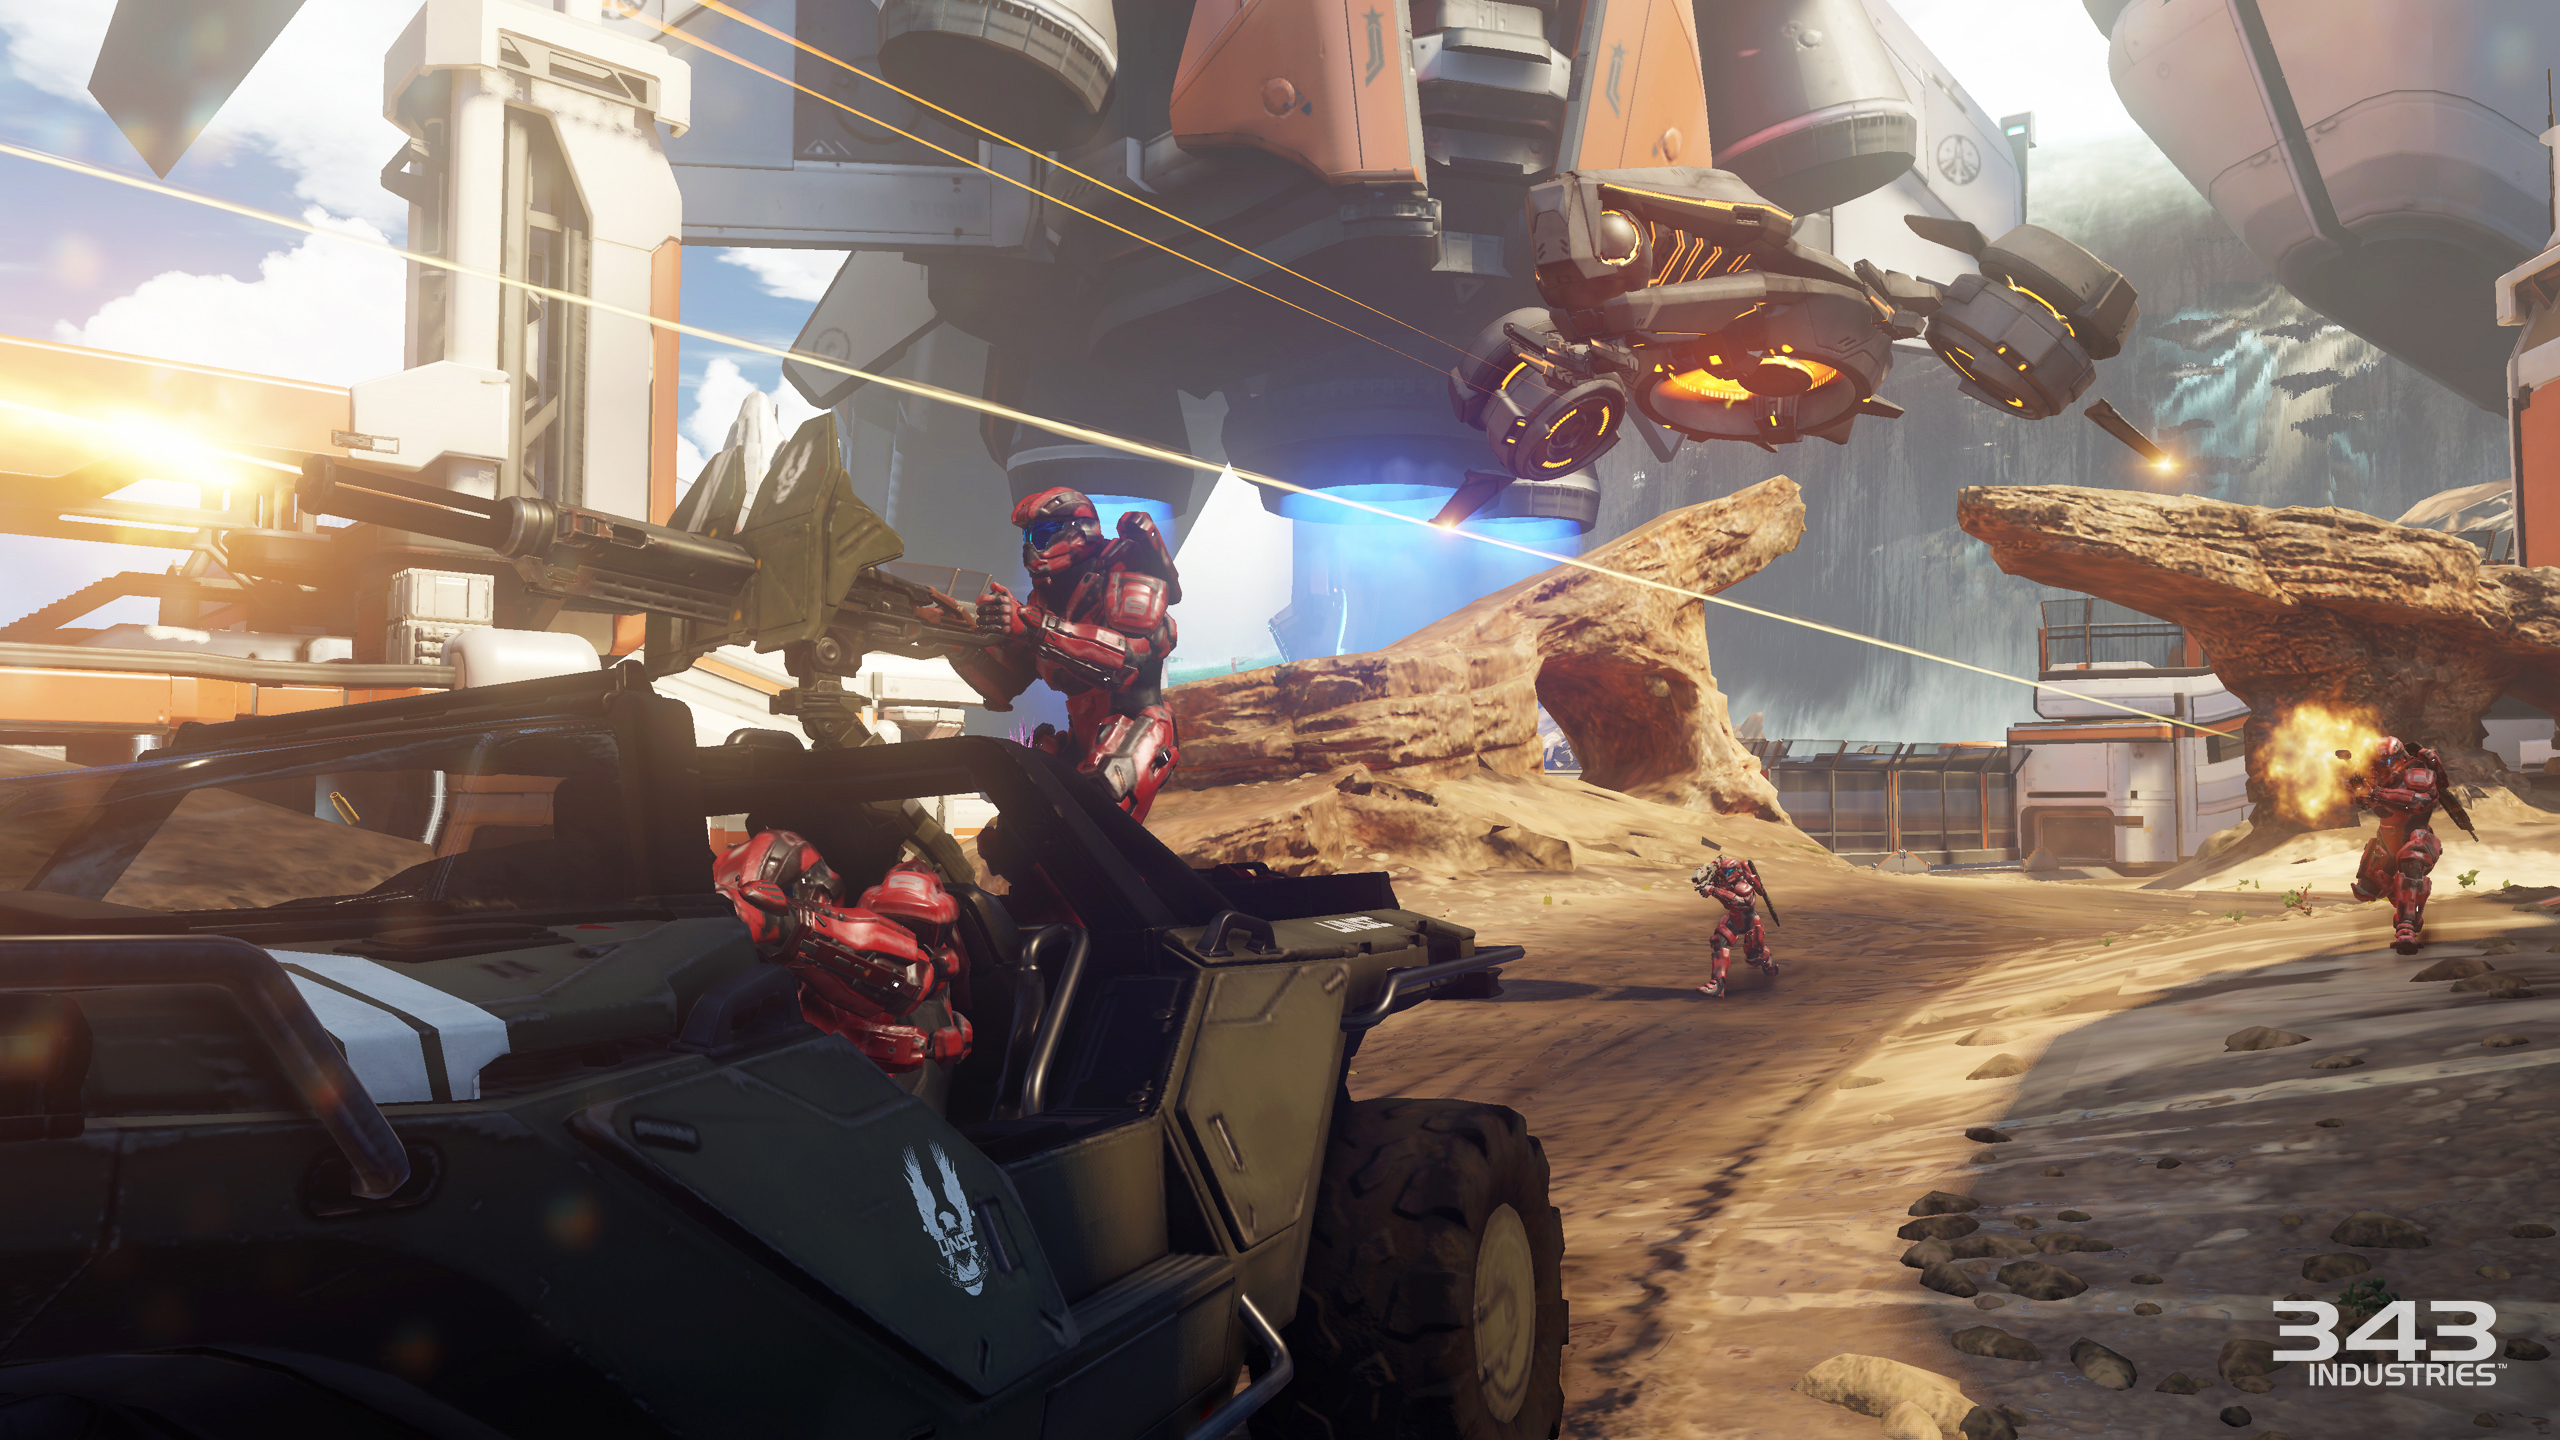 With Warzone, Halo 5 Guardians returns to online multiplayer relevance Ars Technica